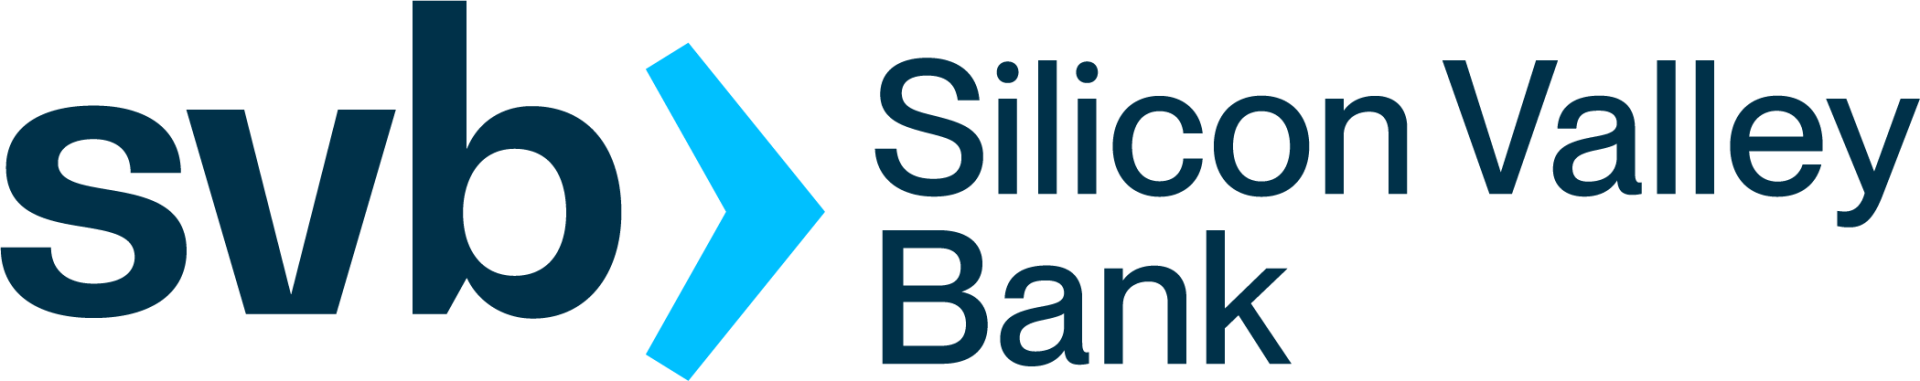 Silicon Valley Bank
          
   <img src=